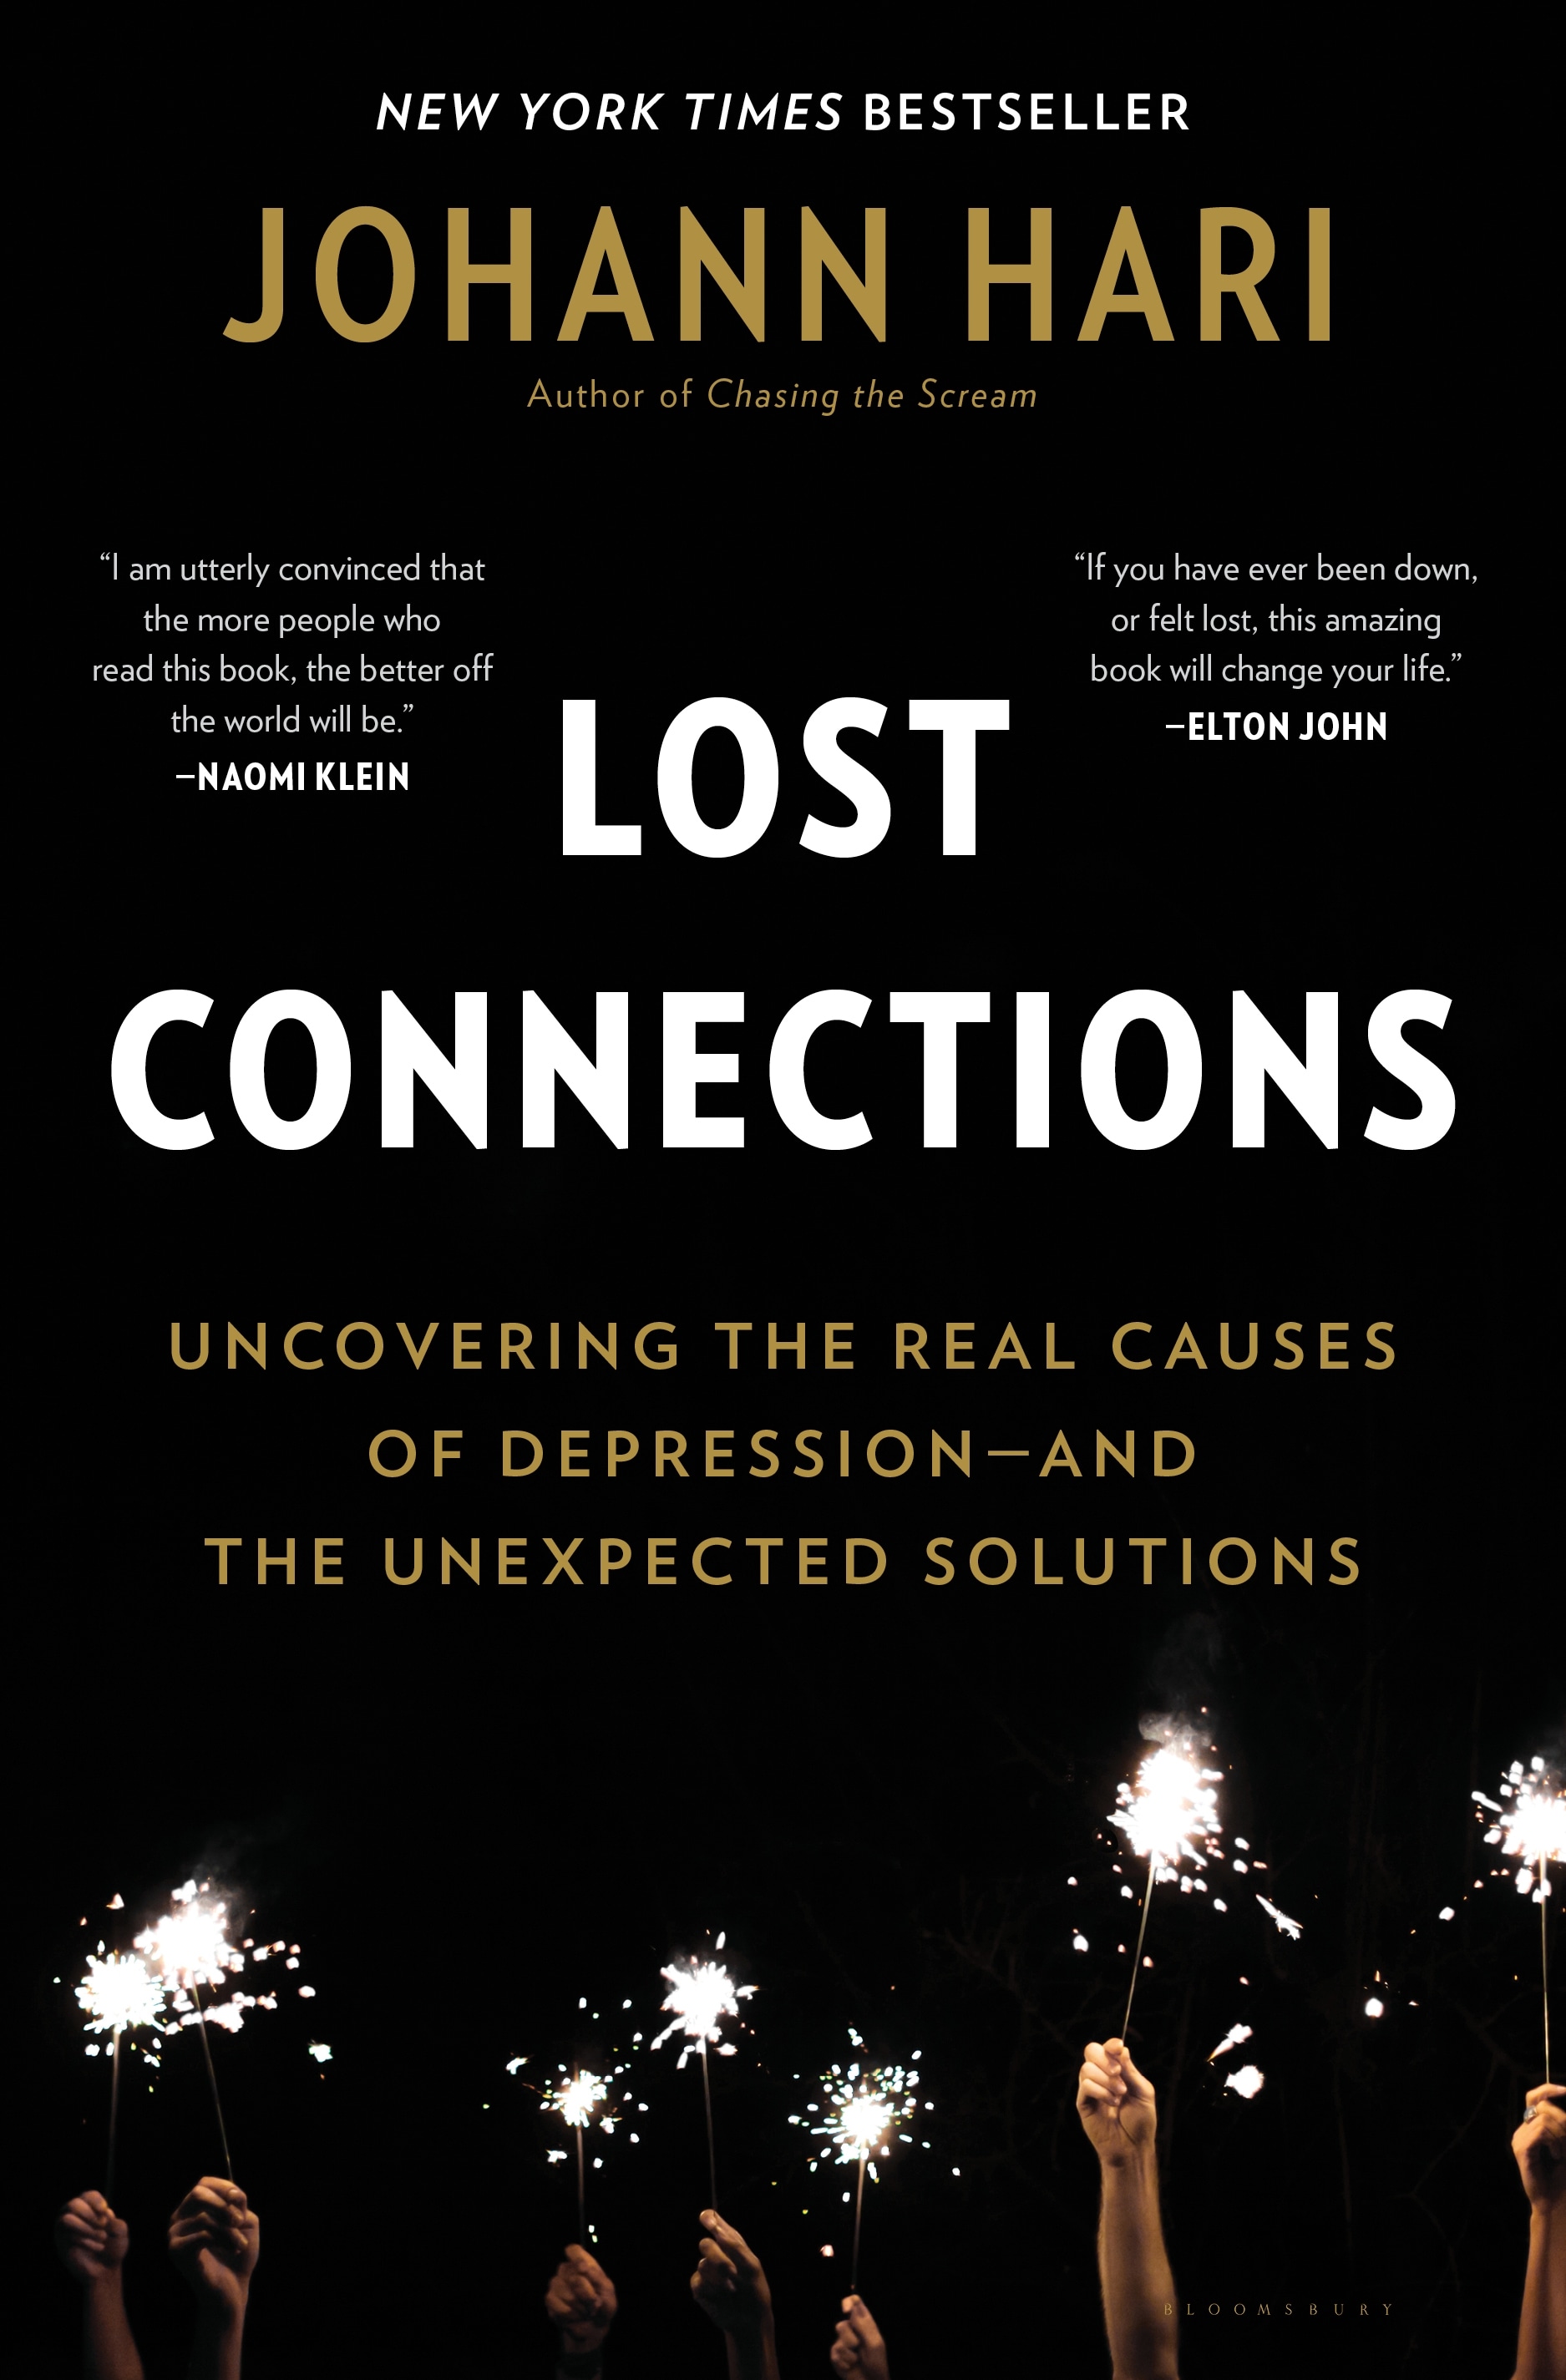 Book “Lost Connections” by Johann Hari